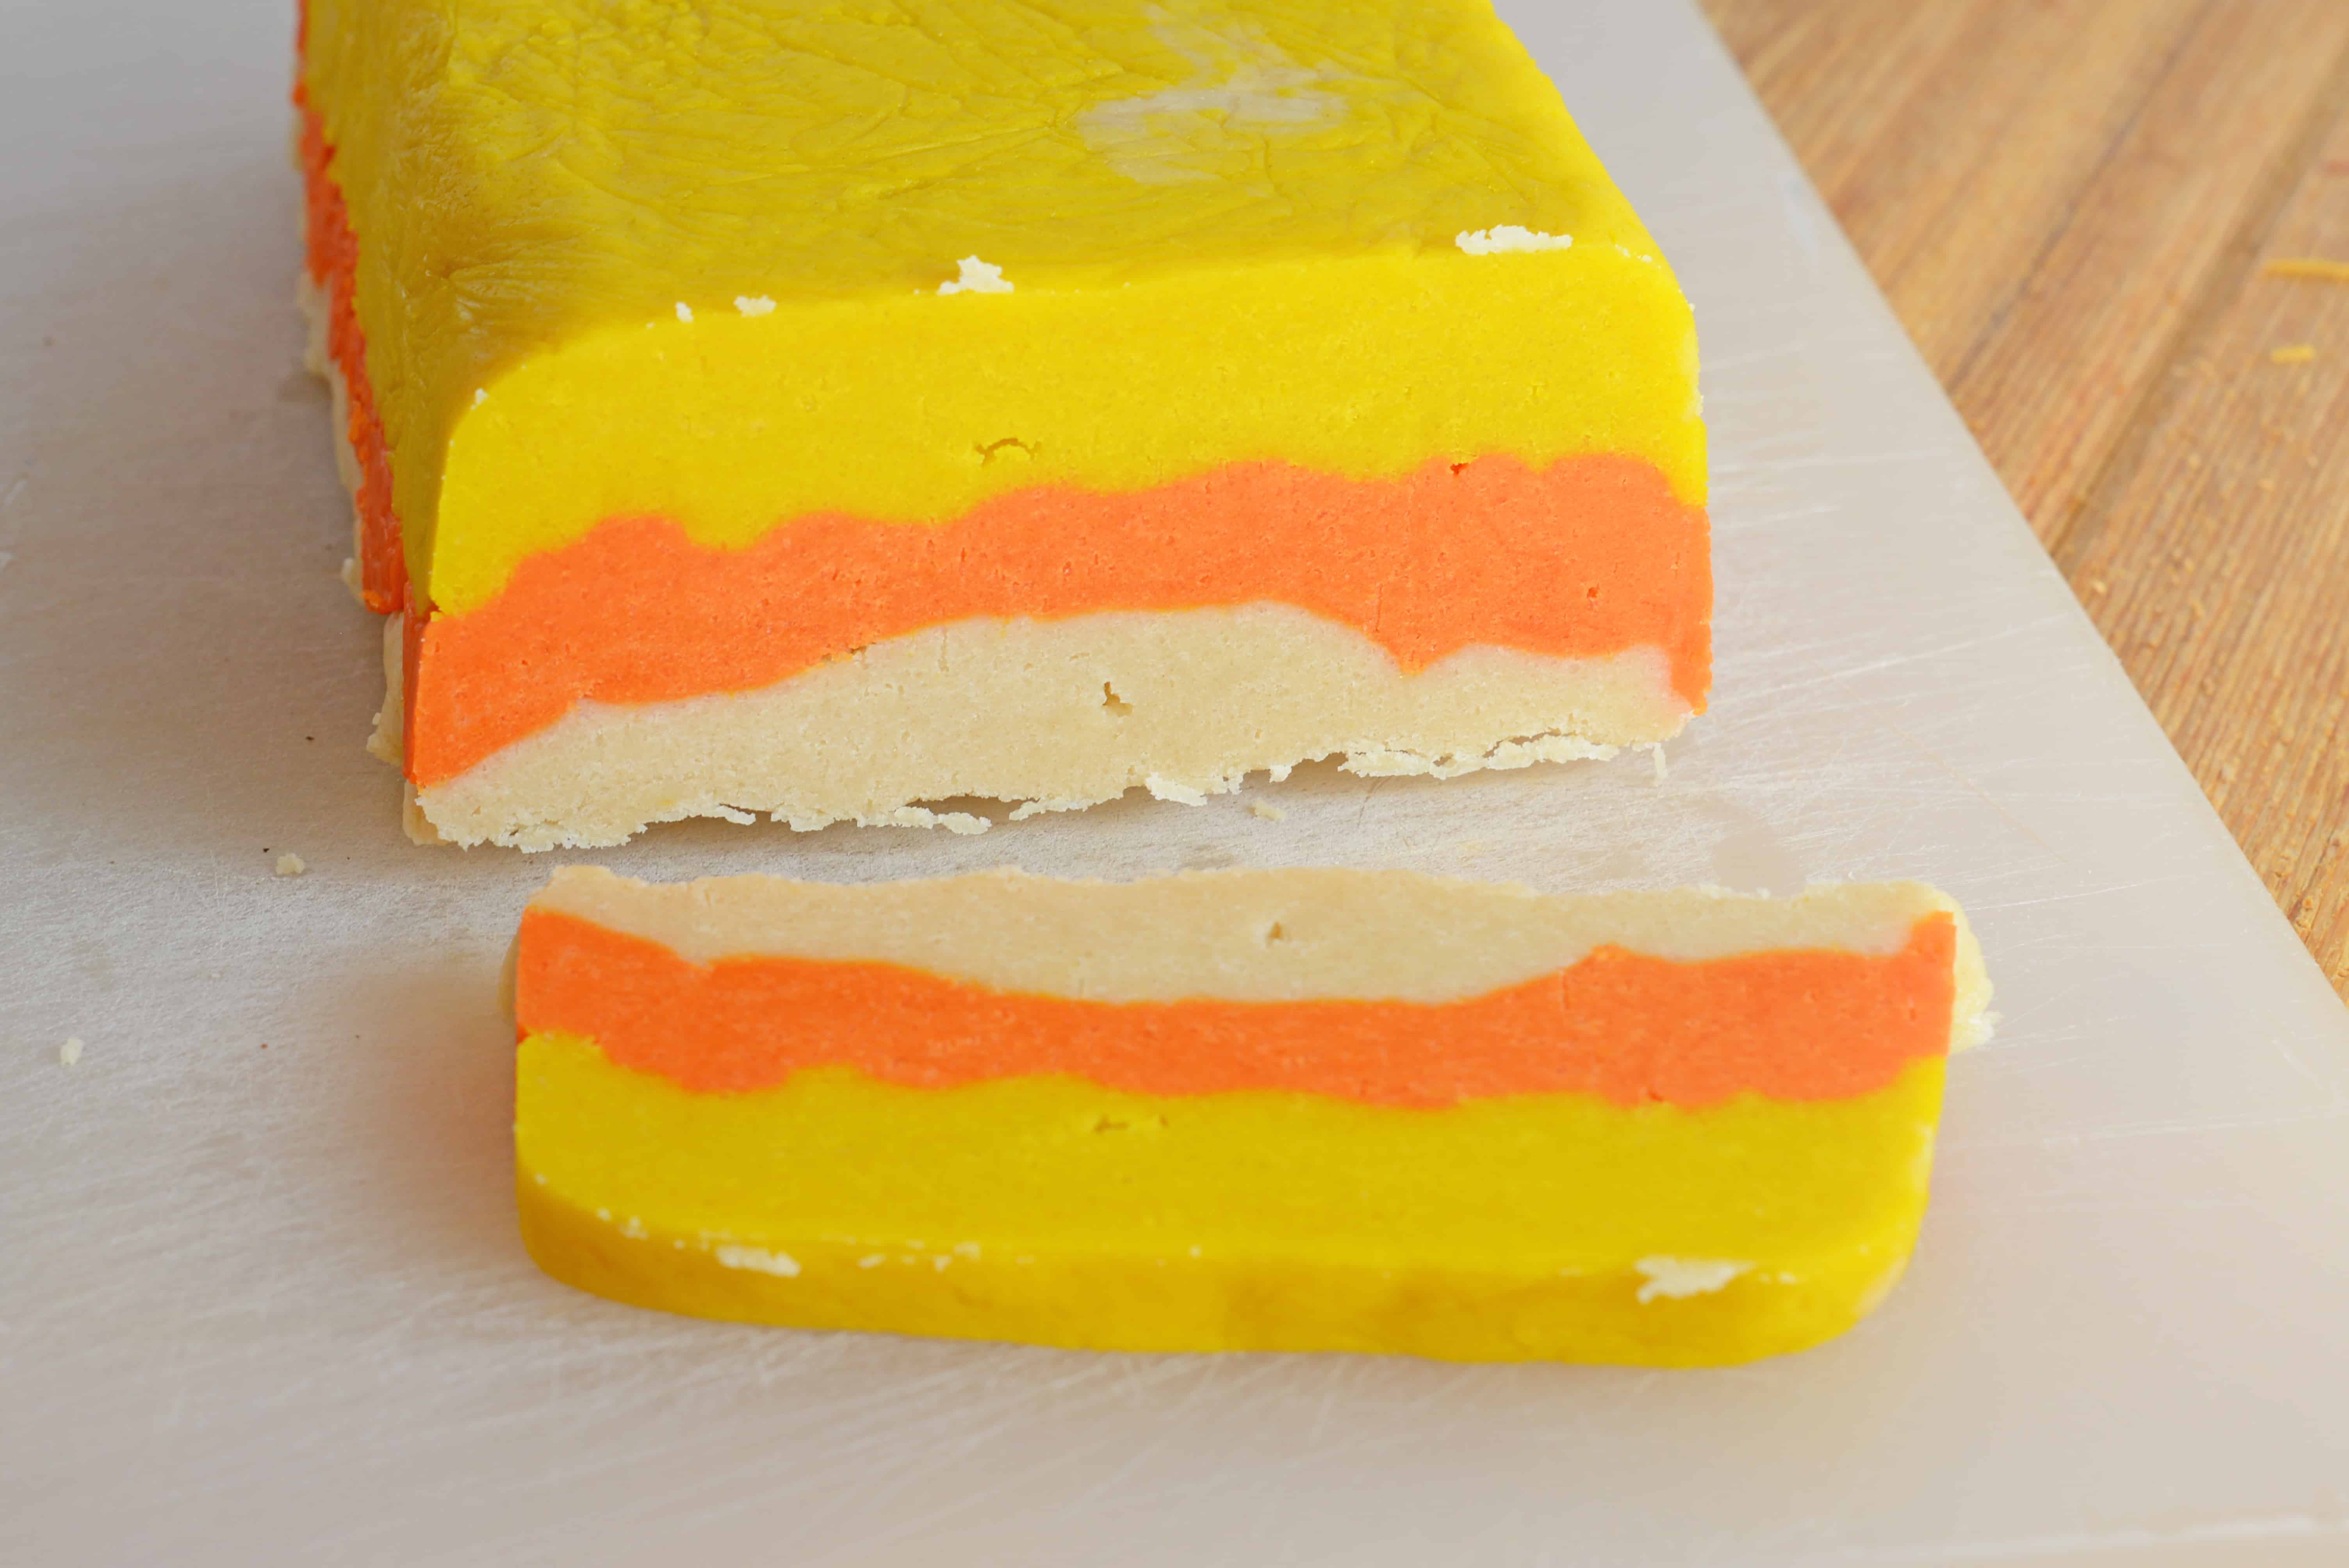 Candy Corn Sugar Cookies are the perfect Halloween Cookie! 